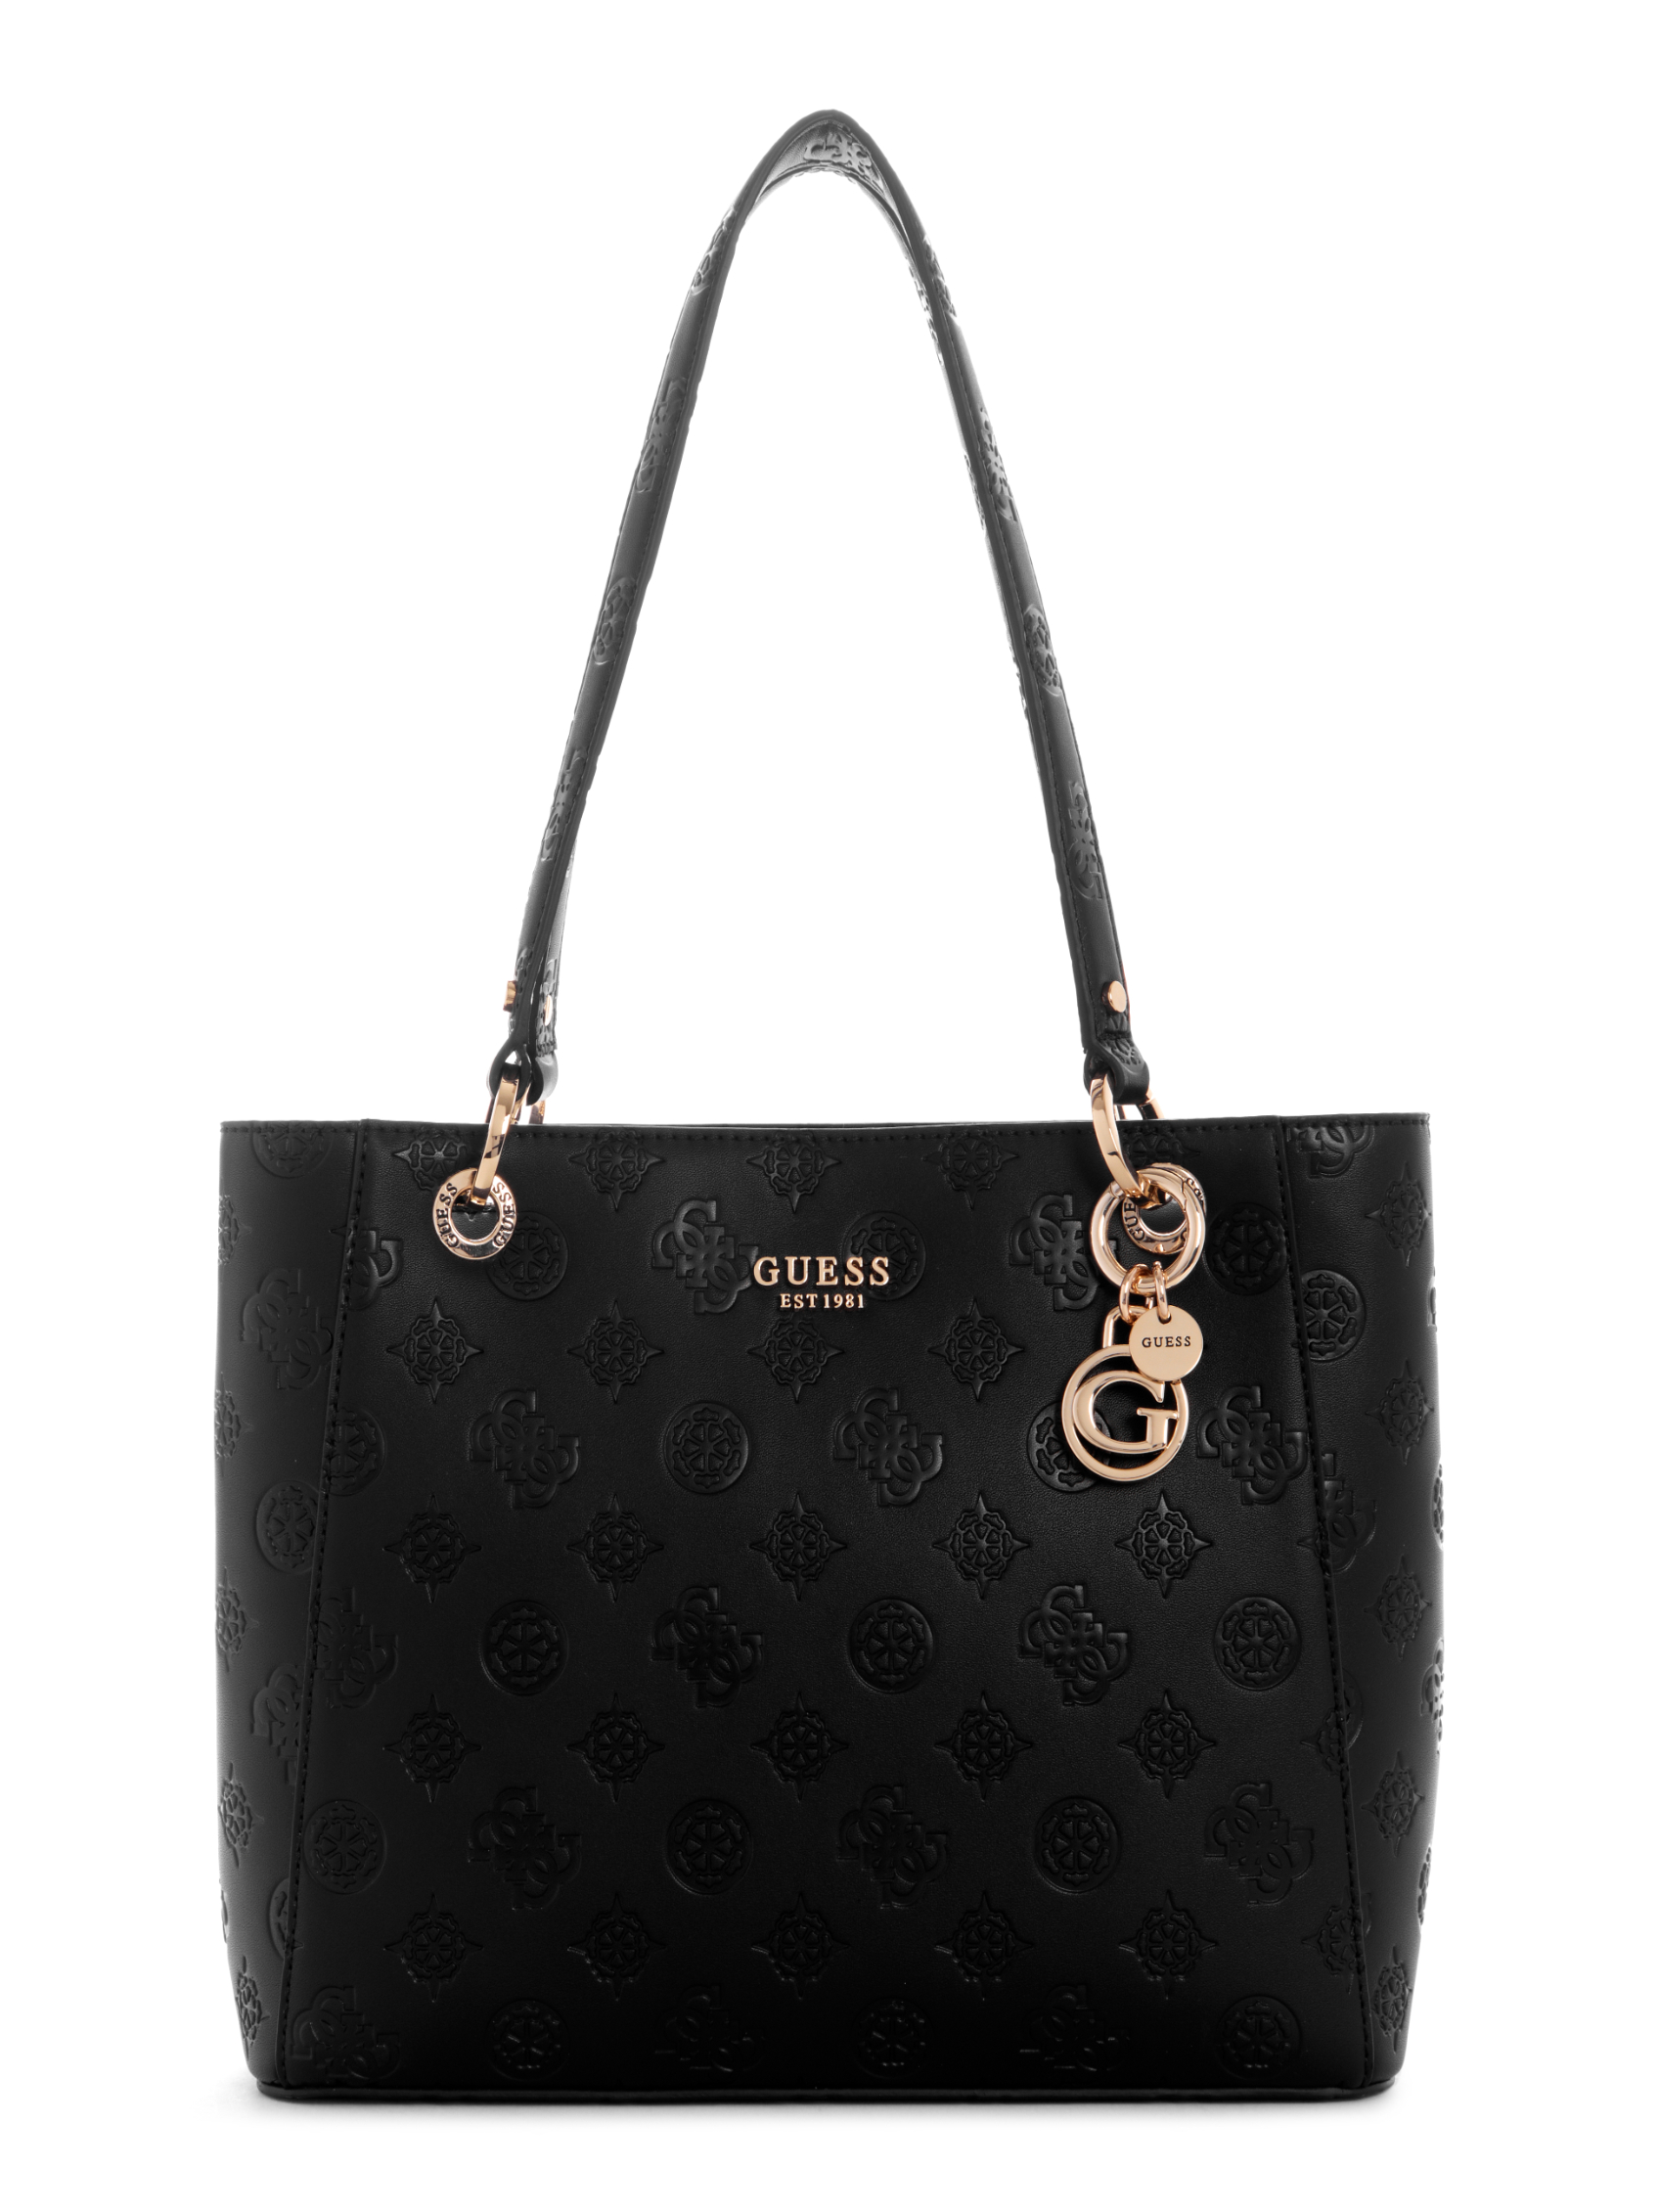 GALERIA SMALL NOEL TOTE | Guess Philippines